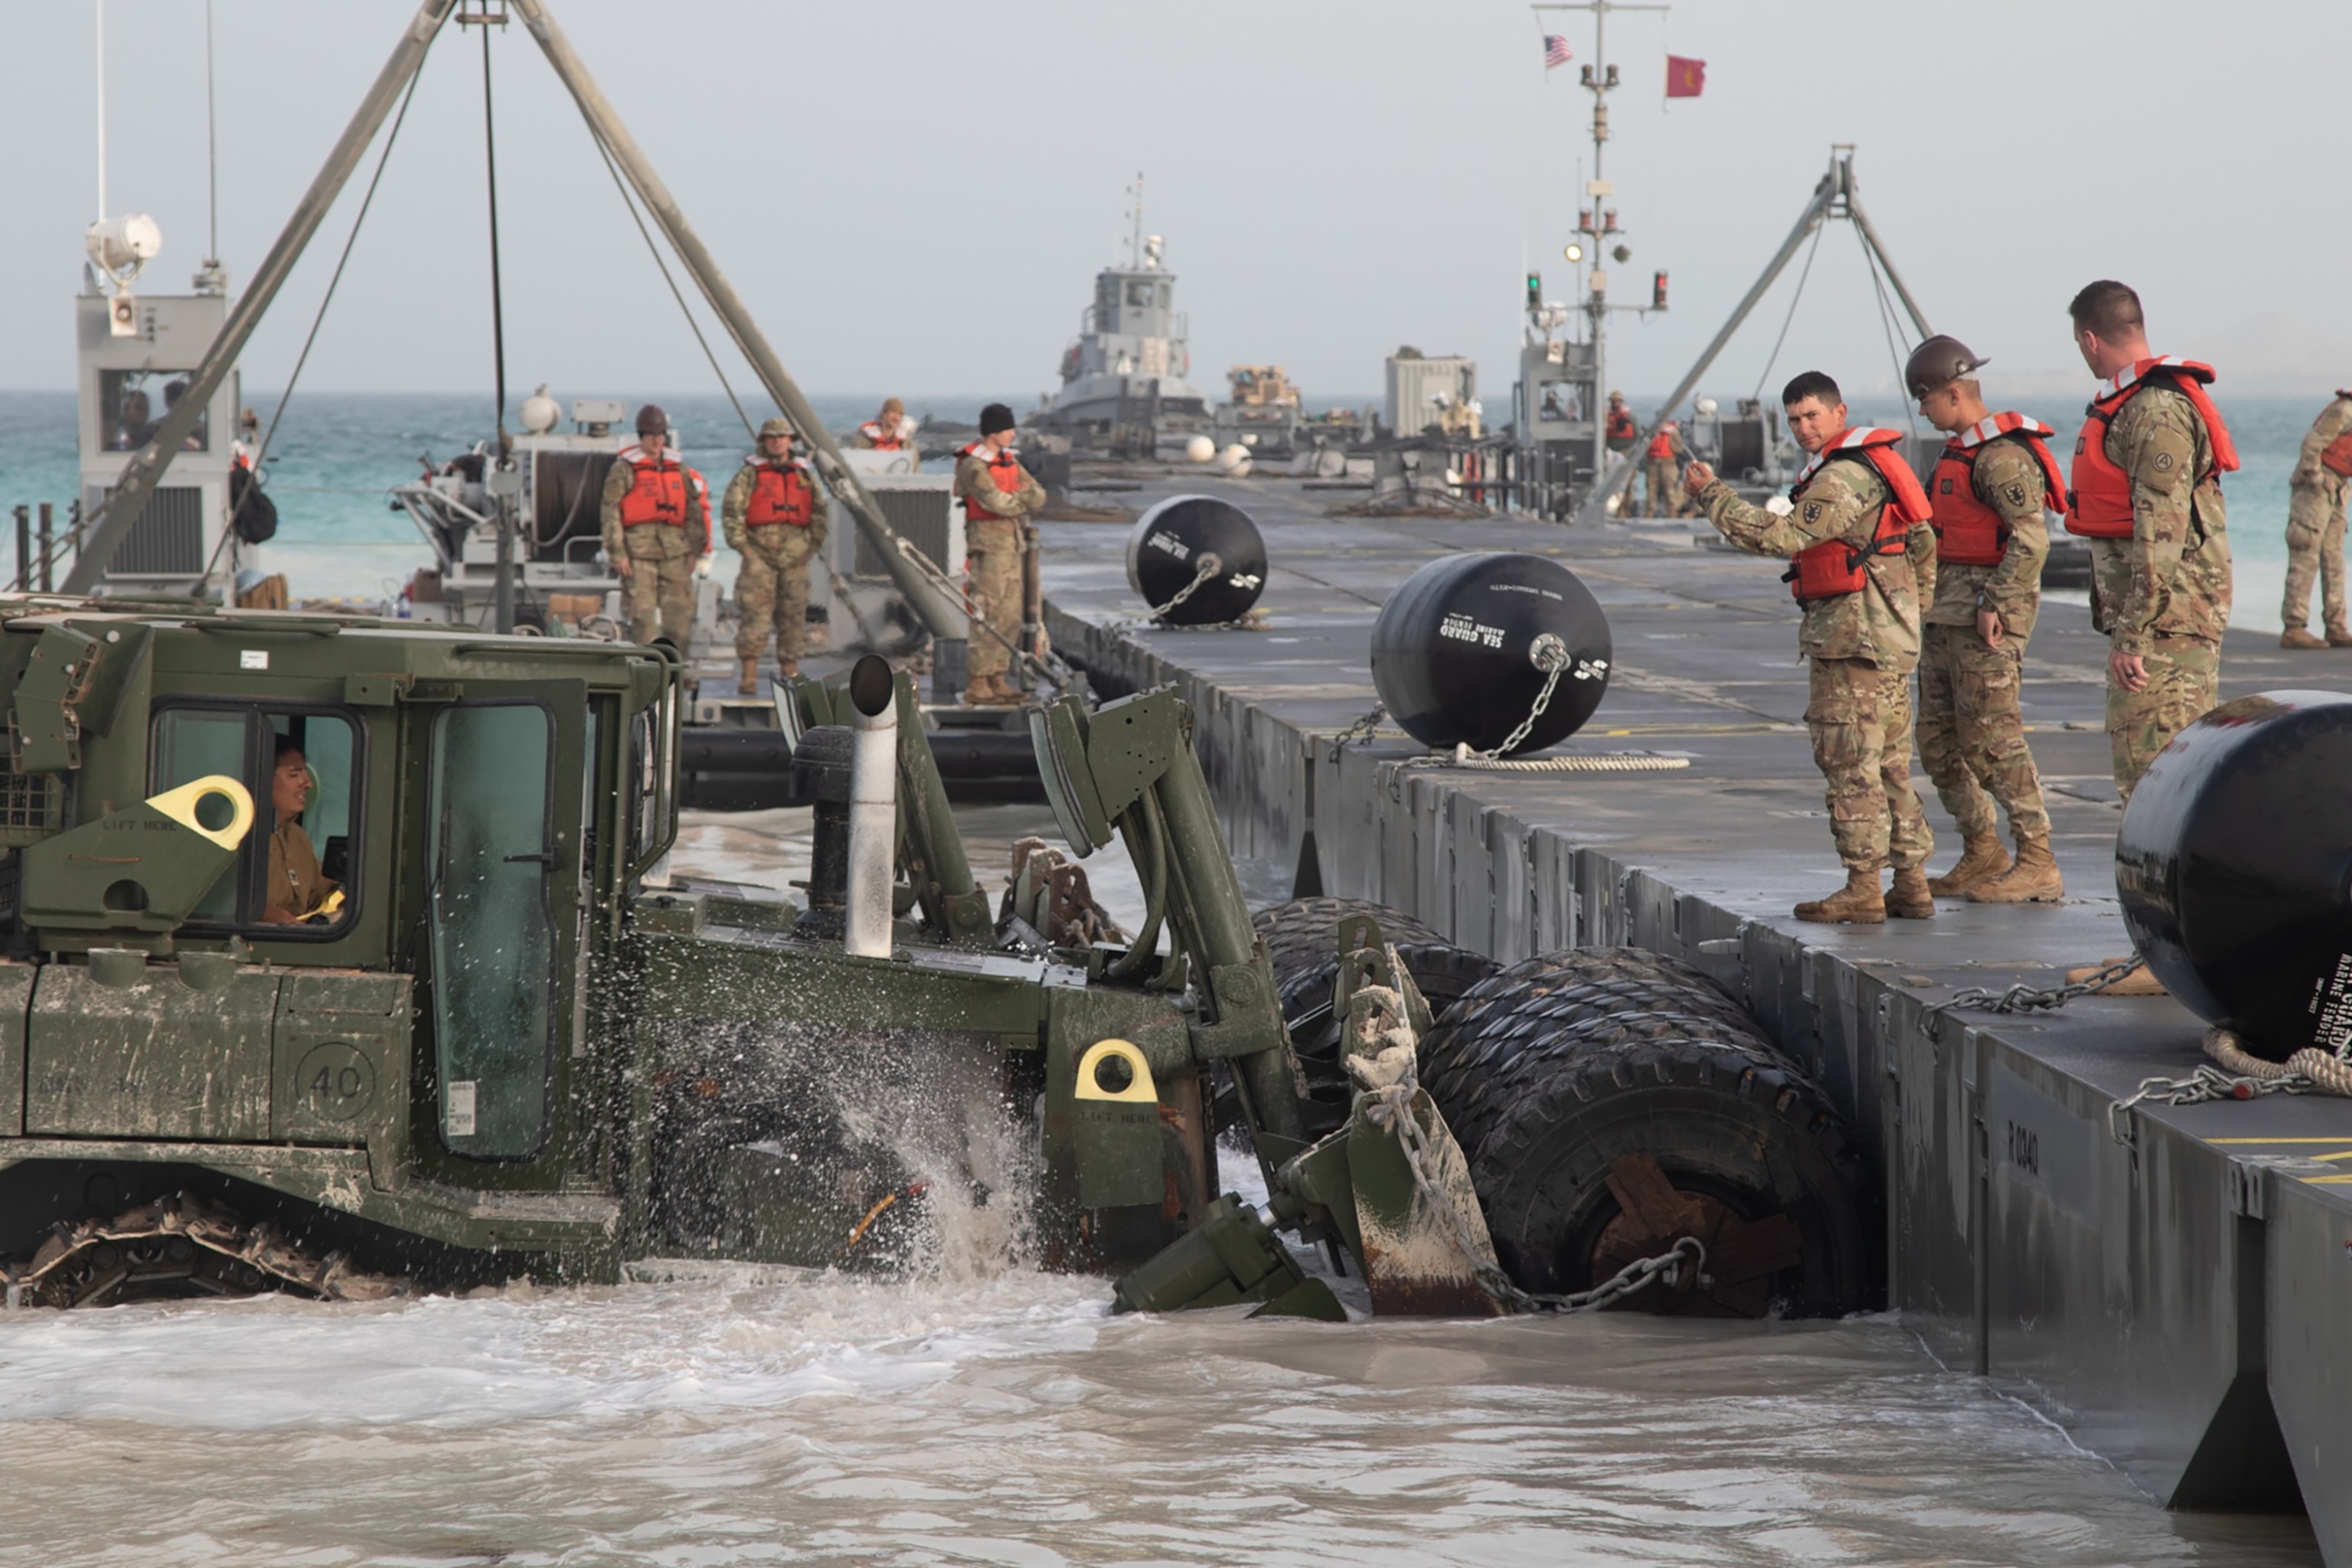 PHOTO: U.S. Army soldiers along with U.S. Navy Seabees align the Modular Causeway System of the Trident Pier in preparation for Iron Union 13 and Native Fury 20 in the United Arab Emirates, Mar 9, 2020.